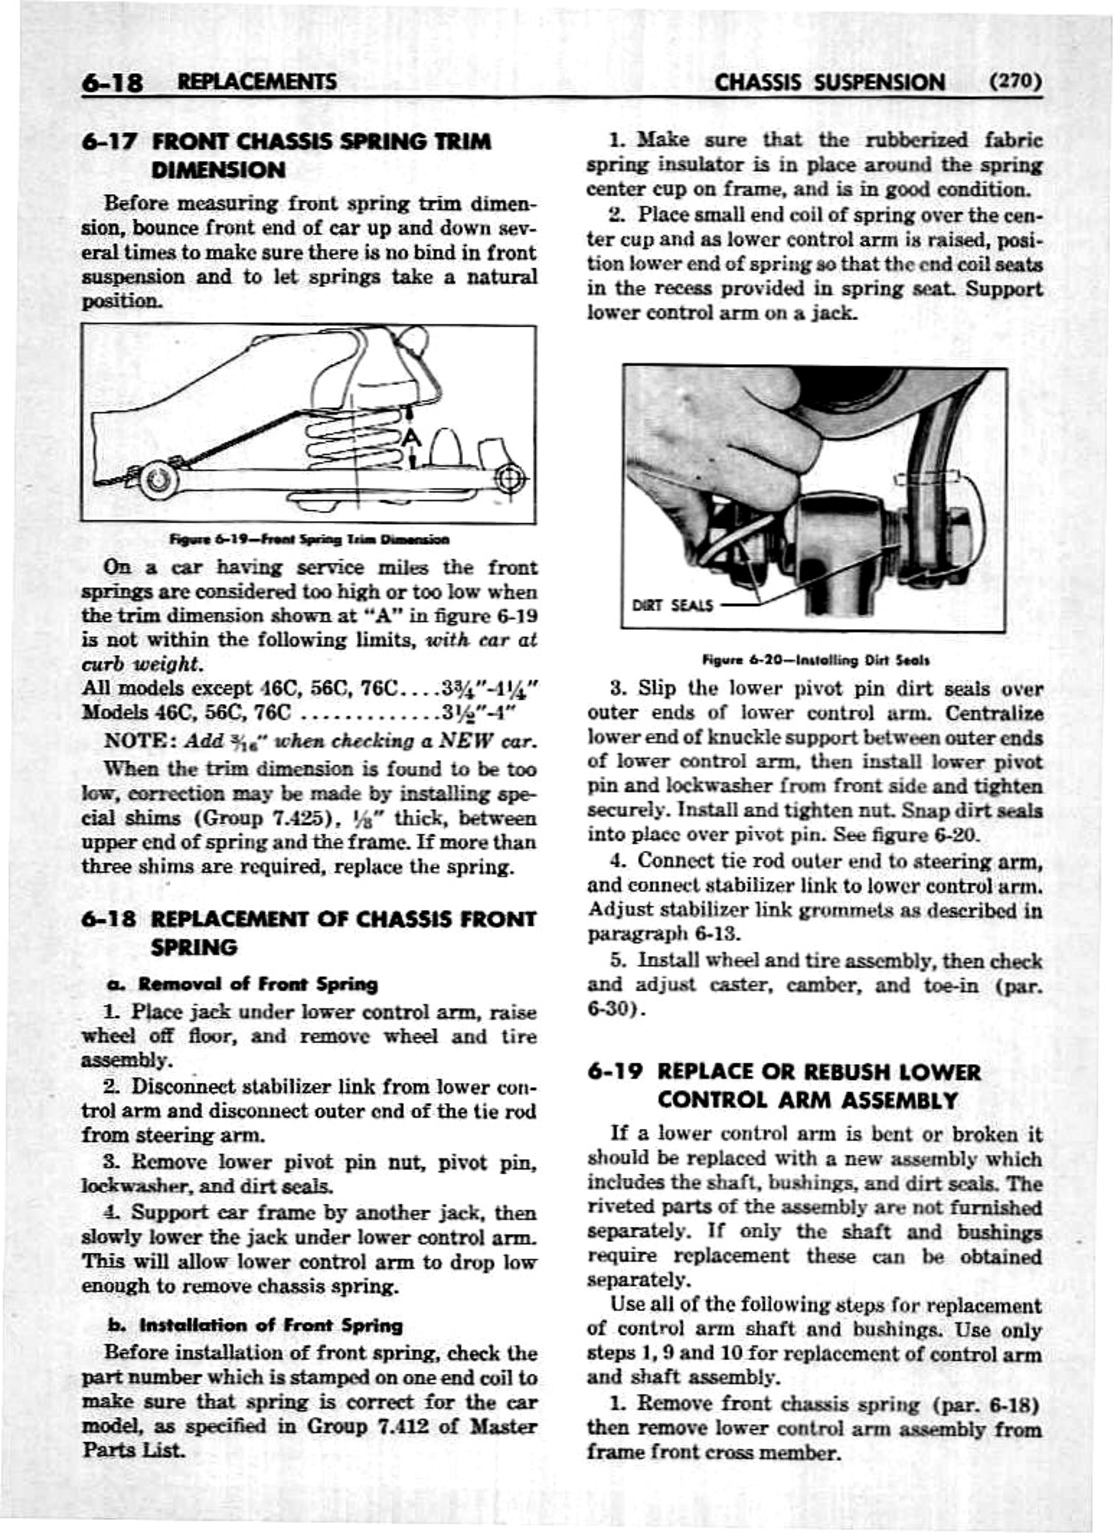 n_07 1952 Buick Shop Manual - Chassis Suspension-018-018.jpg